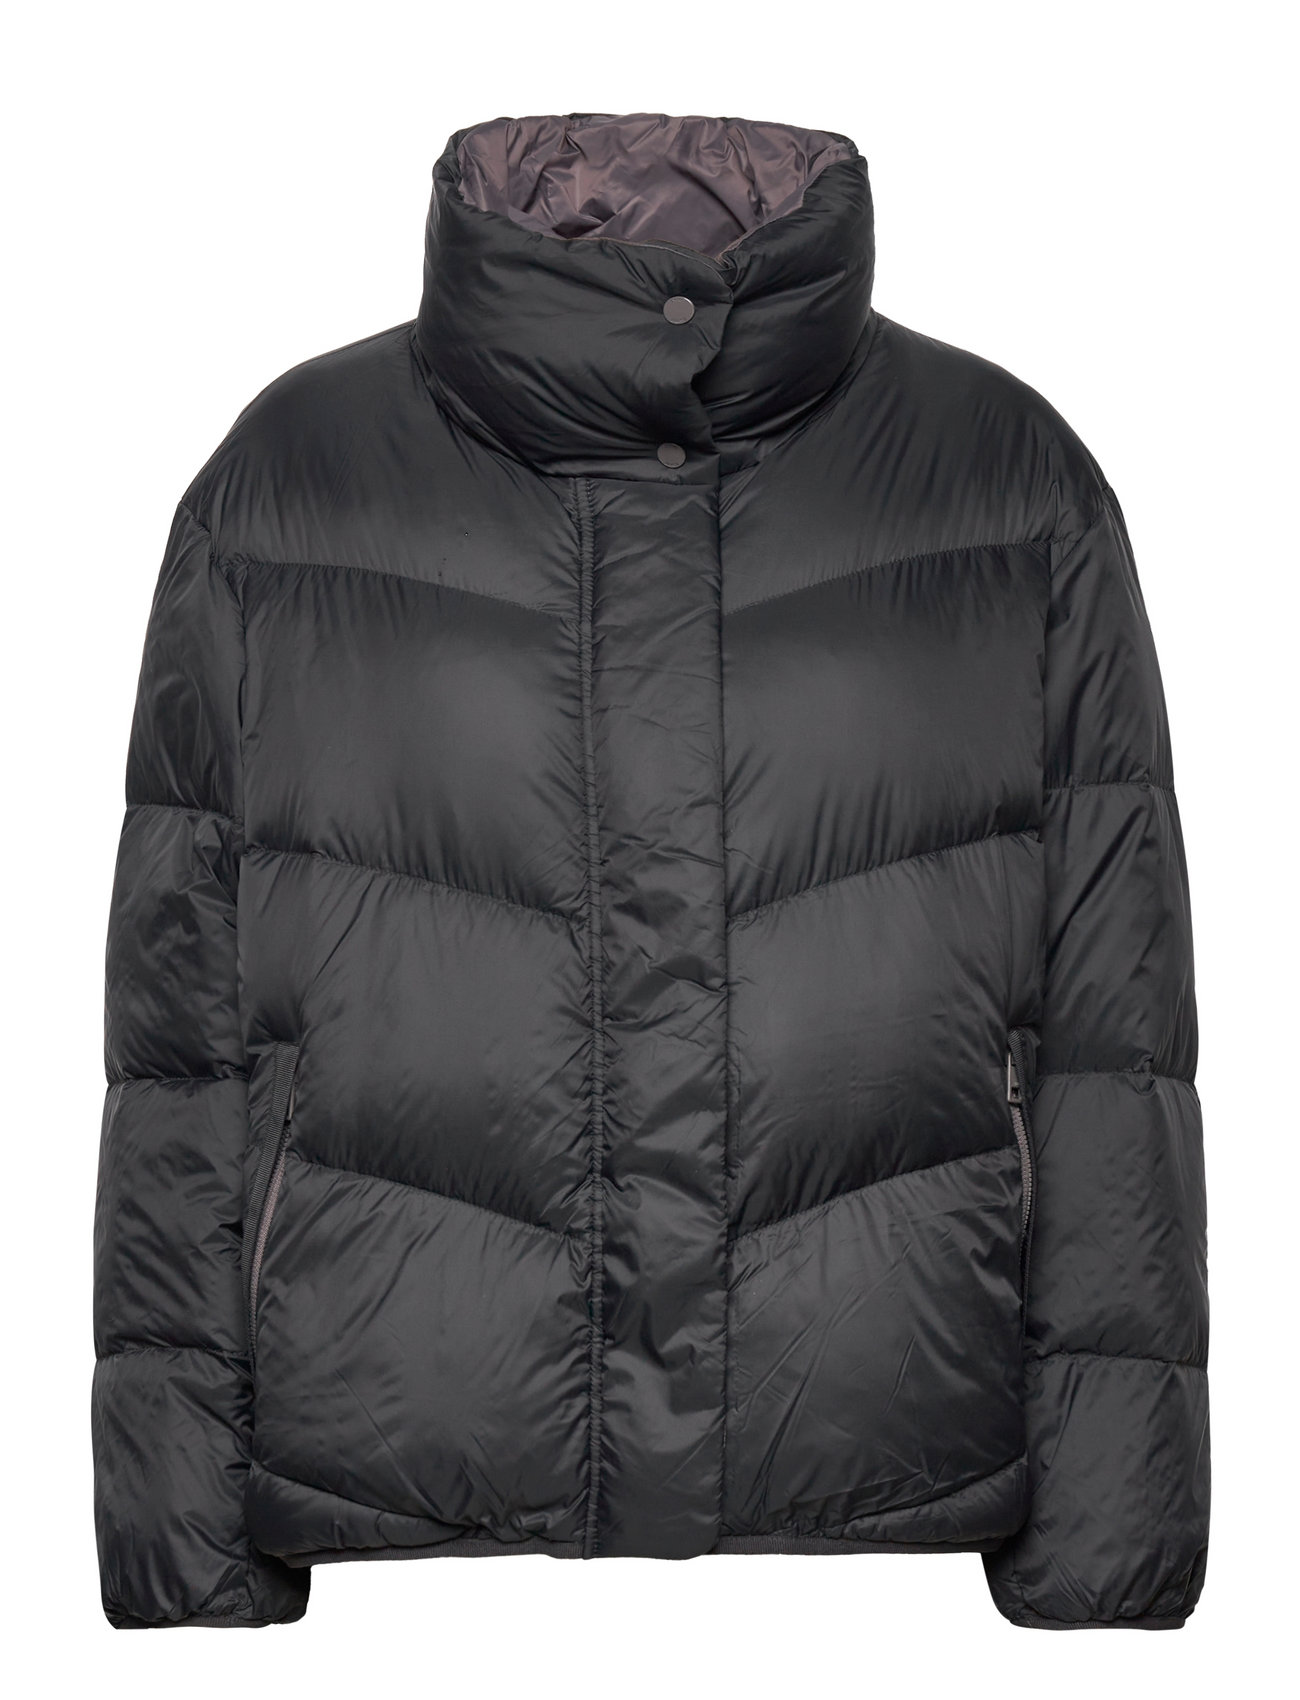 Esprit Casual Long Puffer Coat - 249 €. Buy Padded Coats from Esprit Casual  online at . Fast delivery and easy returns